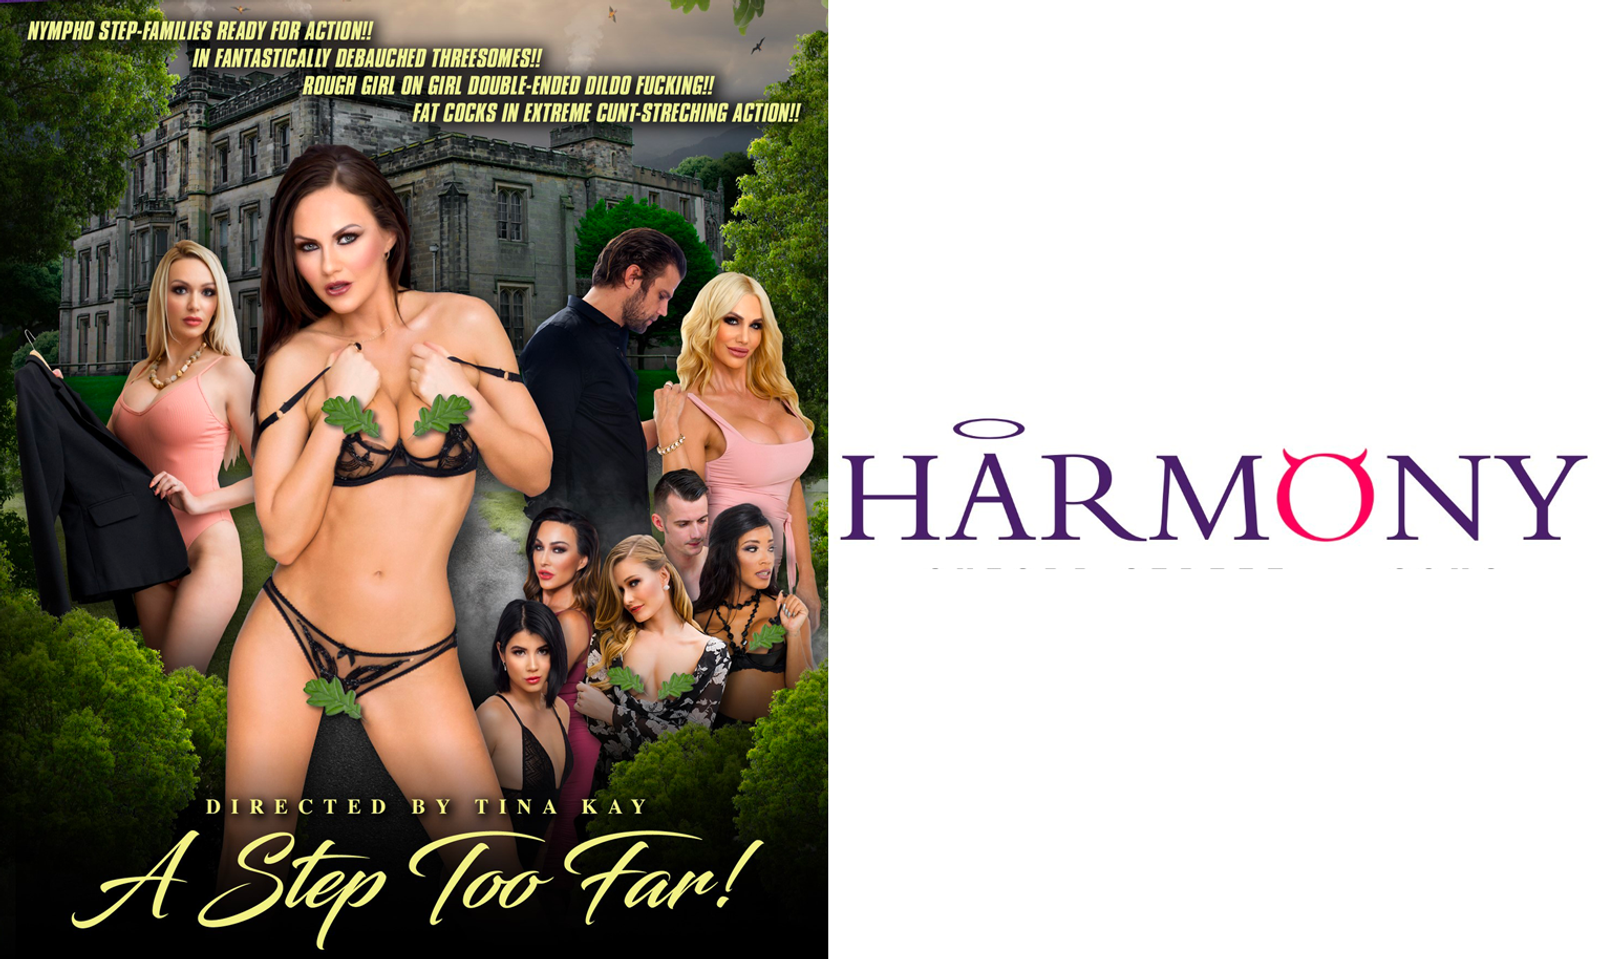 Tina Kay Takes It 'A Step Too Far' for Harmony Films